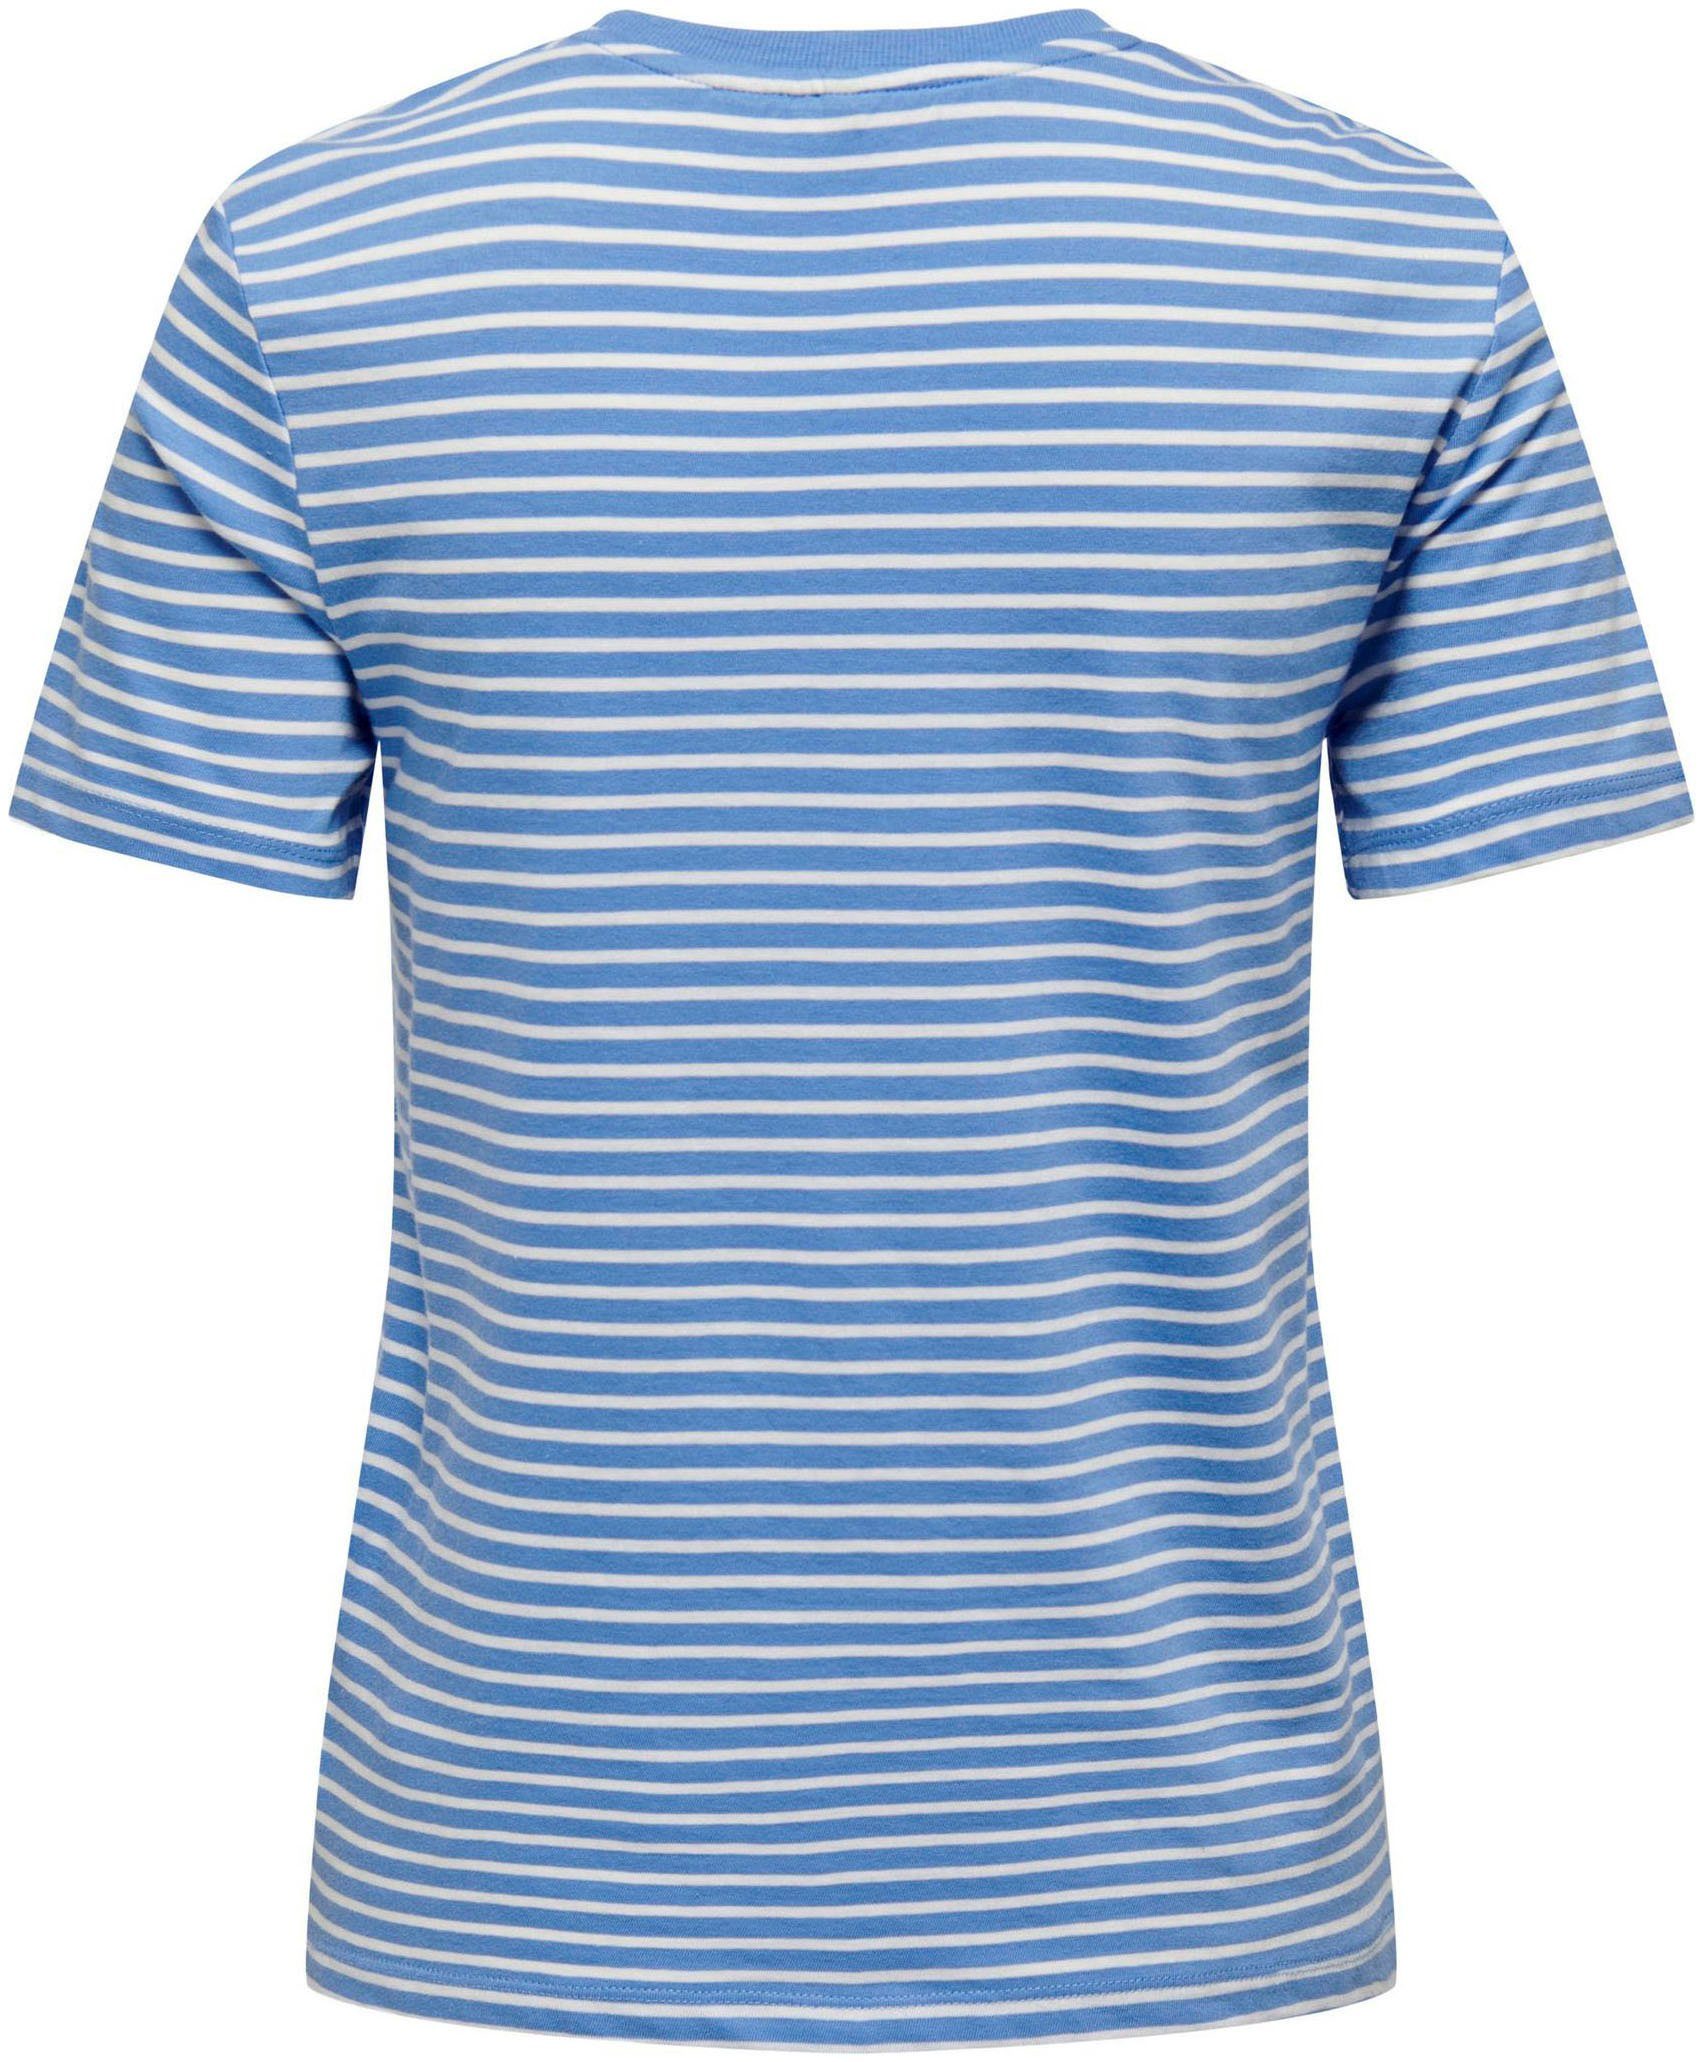 Print:In ONLY Provence S/S risk ONLWEEKDAY (high Rundhalsshirt STRIPE red) love REG BOX TOP JRS